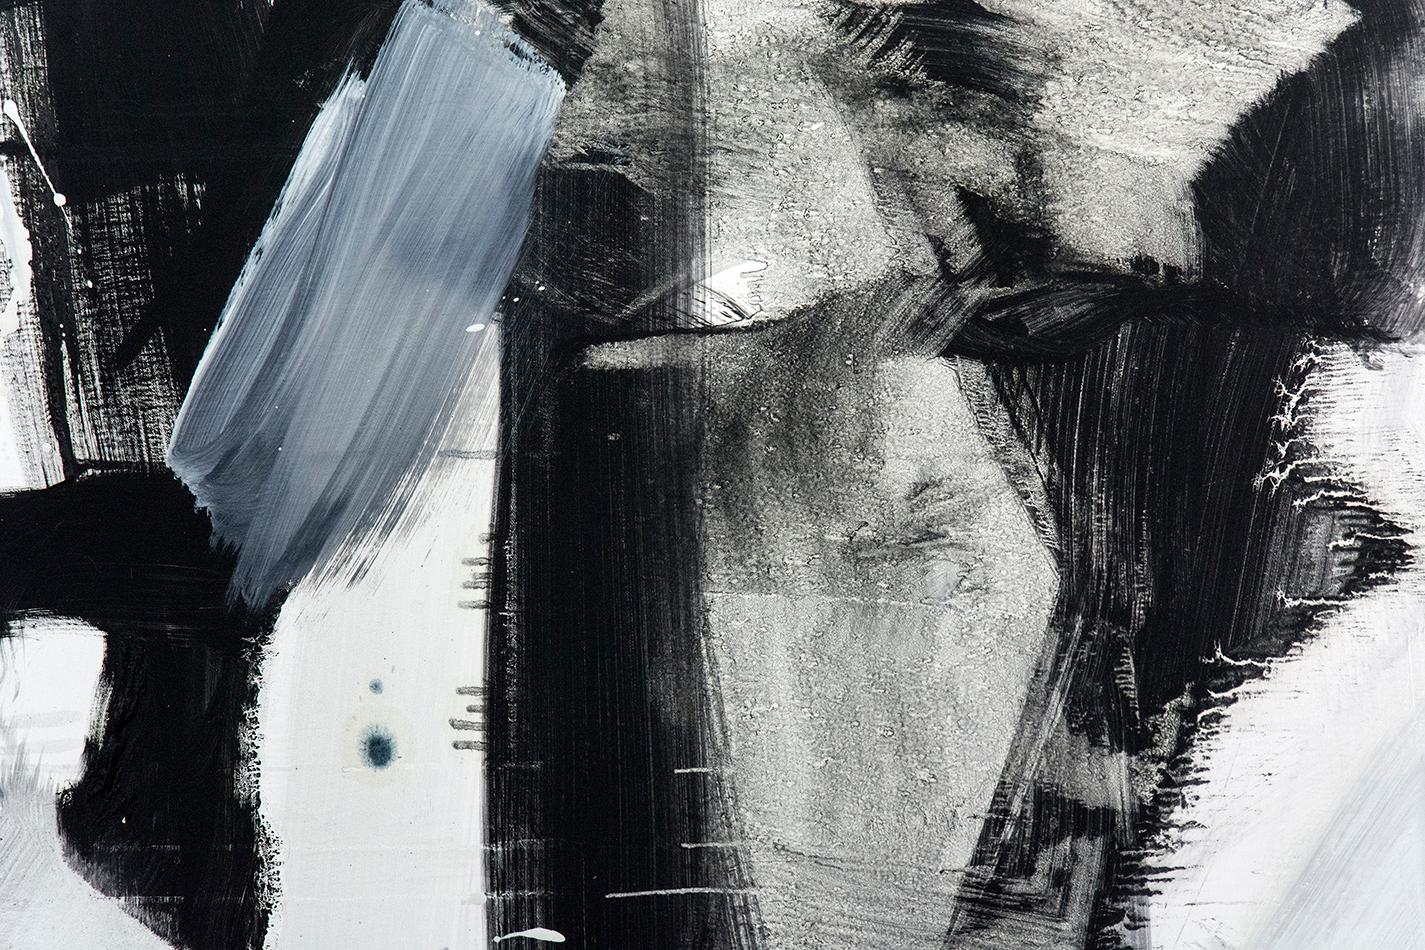 Hvodjra No 13 - large, black, white, grey, gestural abstract, oil on canvas - Painting by Scott Pattinson